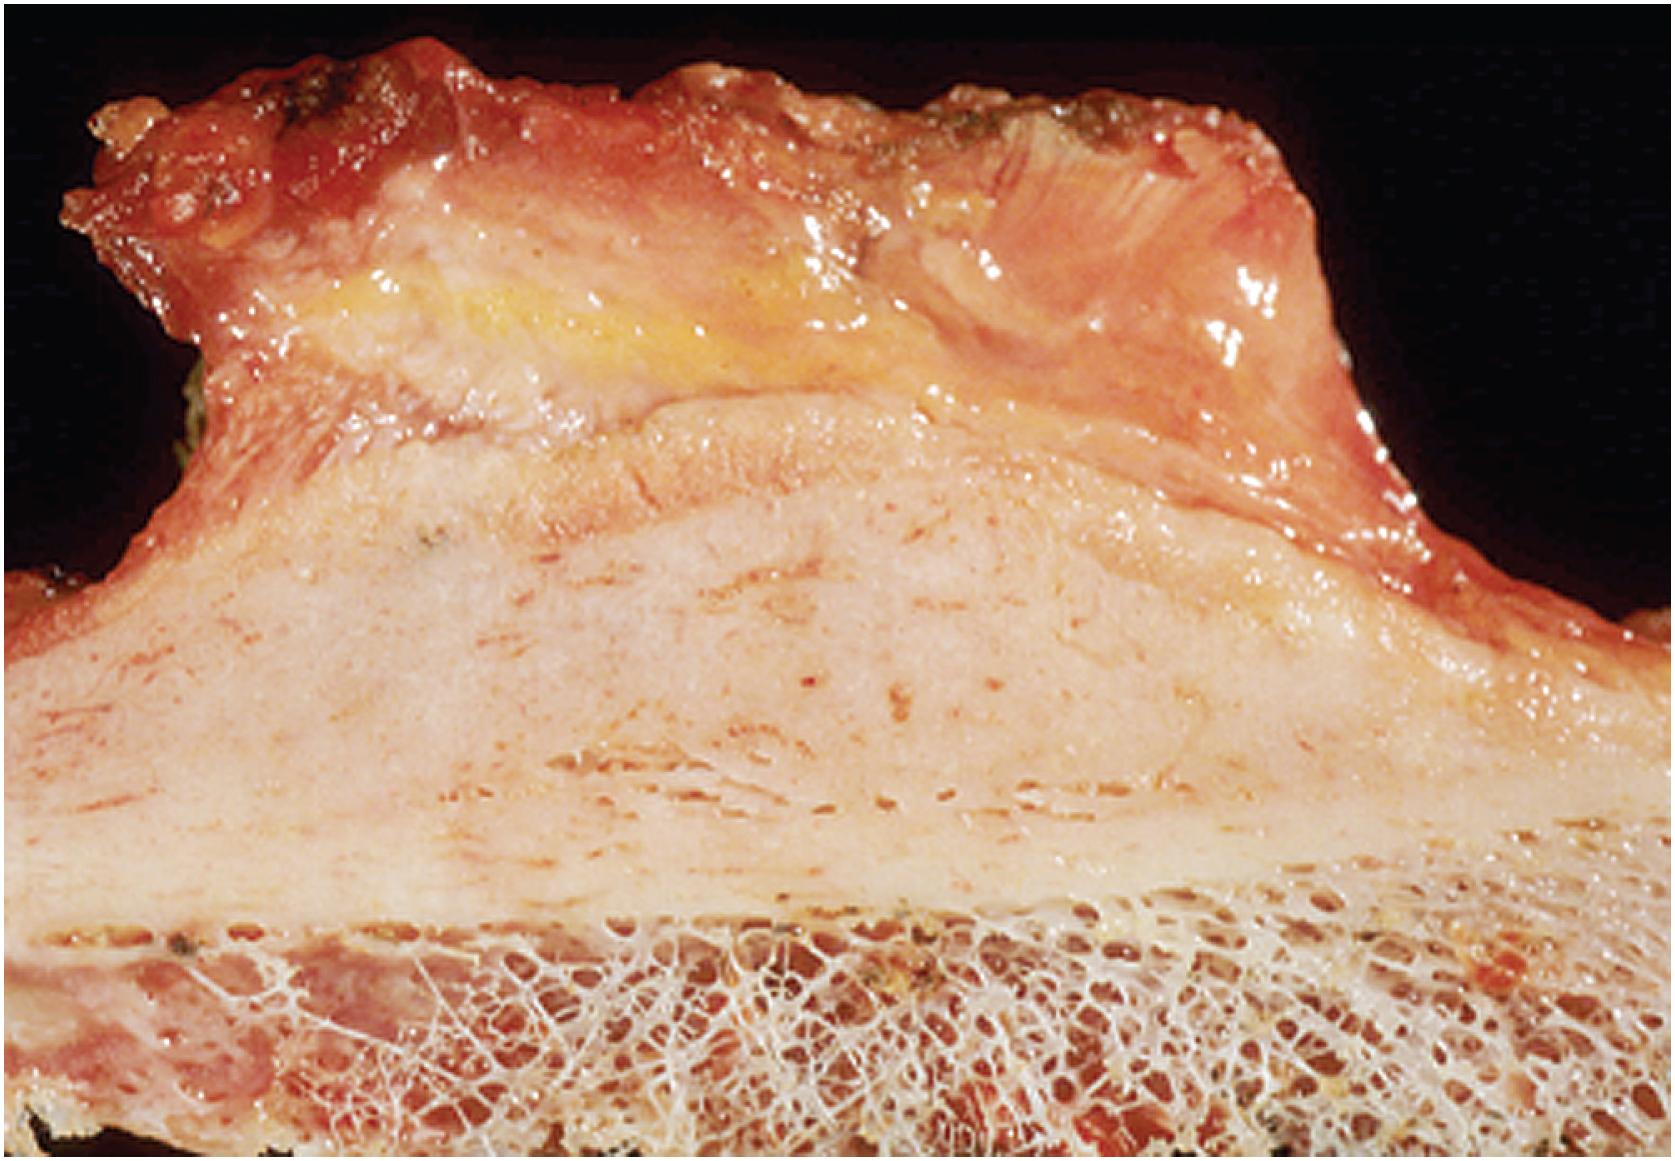 Fig. 16.10, Gross image of osteoma of long bone. The tumor is dense, tan-white, and merges with the underlying cortex.